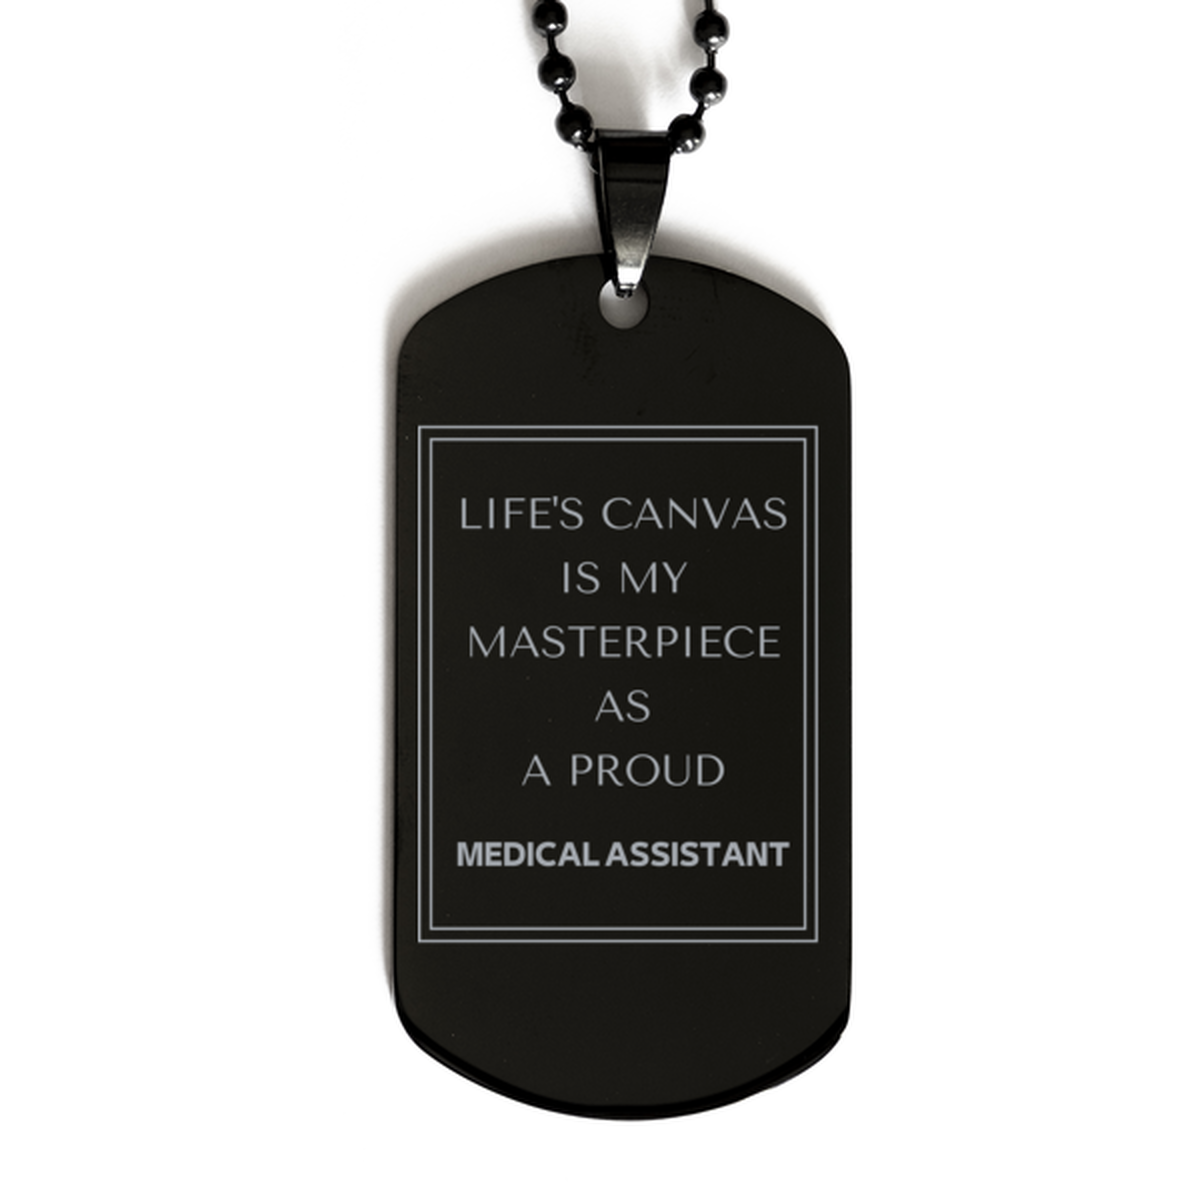 Proud Medical Assistant Gifts, Life's canvas is my masterpiece, Epic Birthday Christmas Unique Black Dog Tag For Medical Assistant, Coworkers, Men, Women, Friends